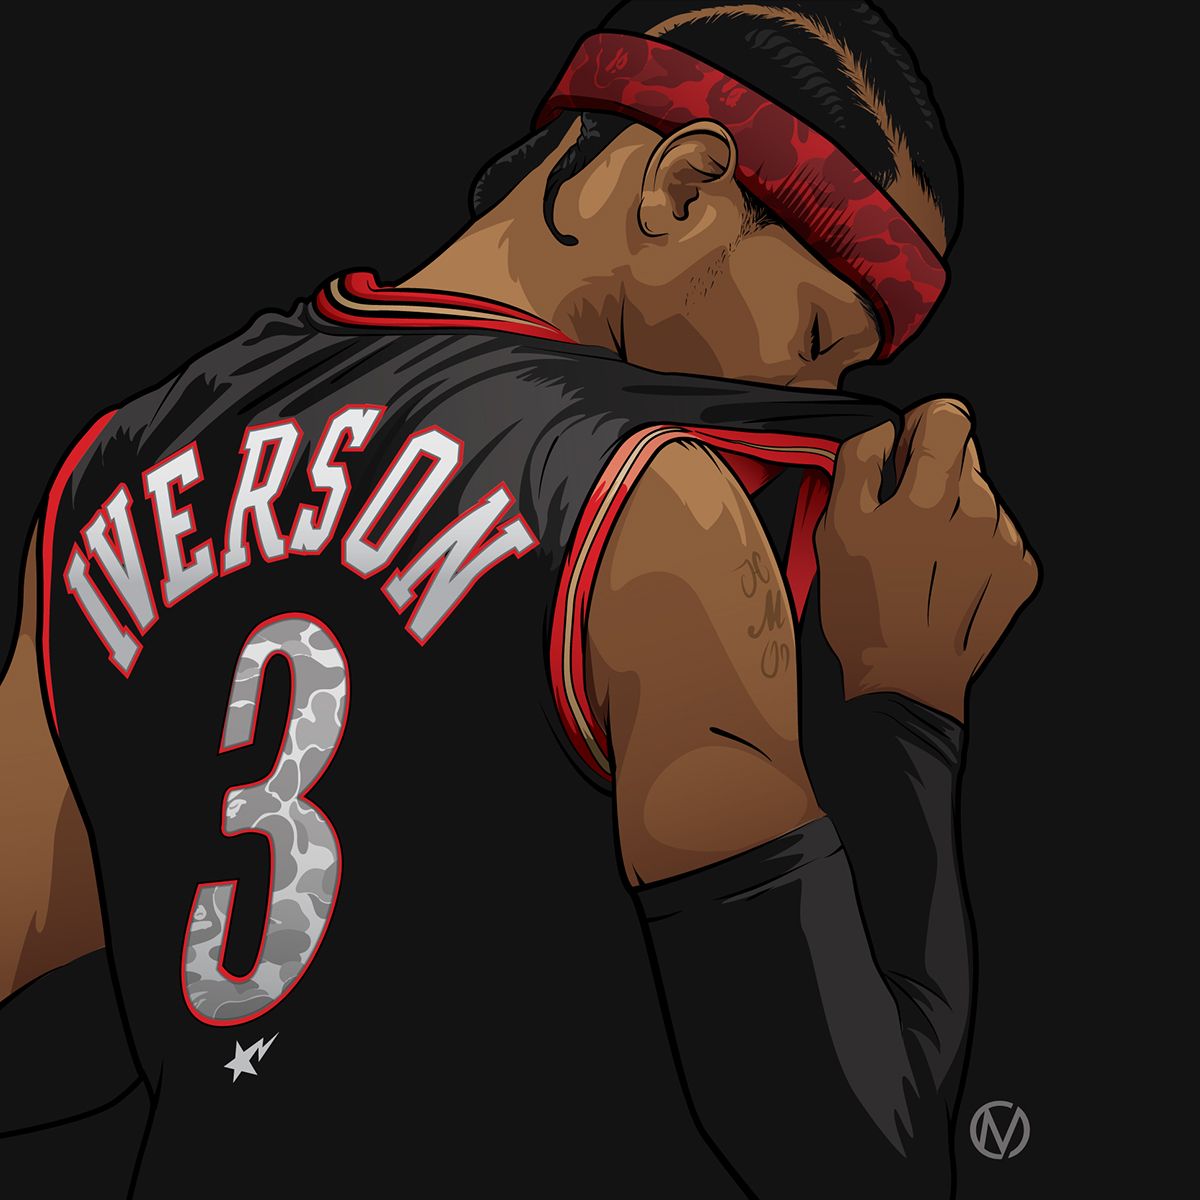 Free Download Allen Iverson X Bape Illustration Art Pinterest 1200x1200 For Your Desktop Mobile Tablet Explore 88 Nba Youngboy Wallpapers Nba Youngboy Wallpapers Nba Youngboy Wallpaper Nba Youngboy 38 Baby Wallpapers Click on a link in the list below to find yourself a new apple iphone or samsung galaxy wallpaper. free download allen iverson x bape